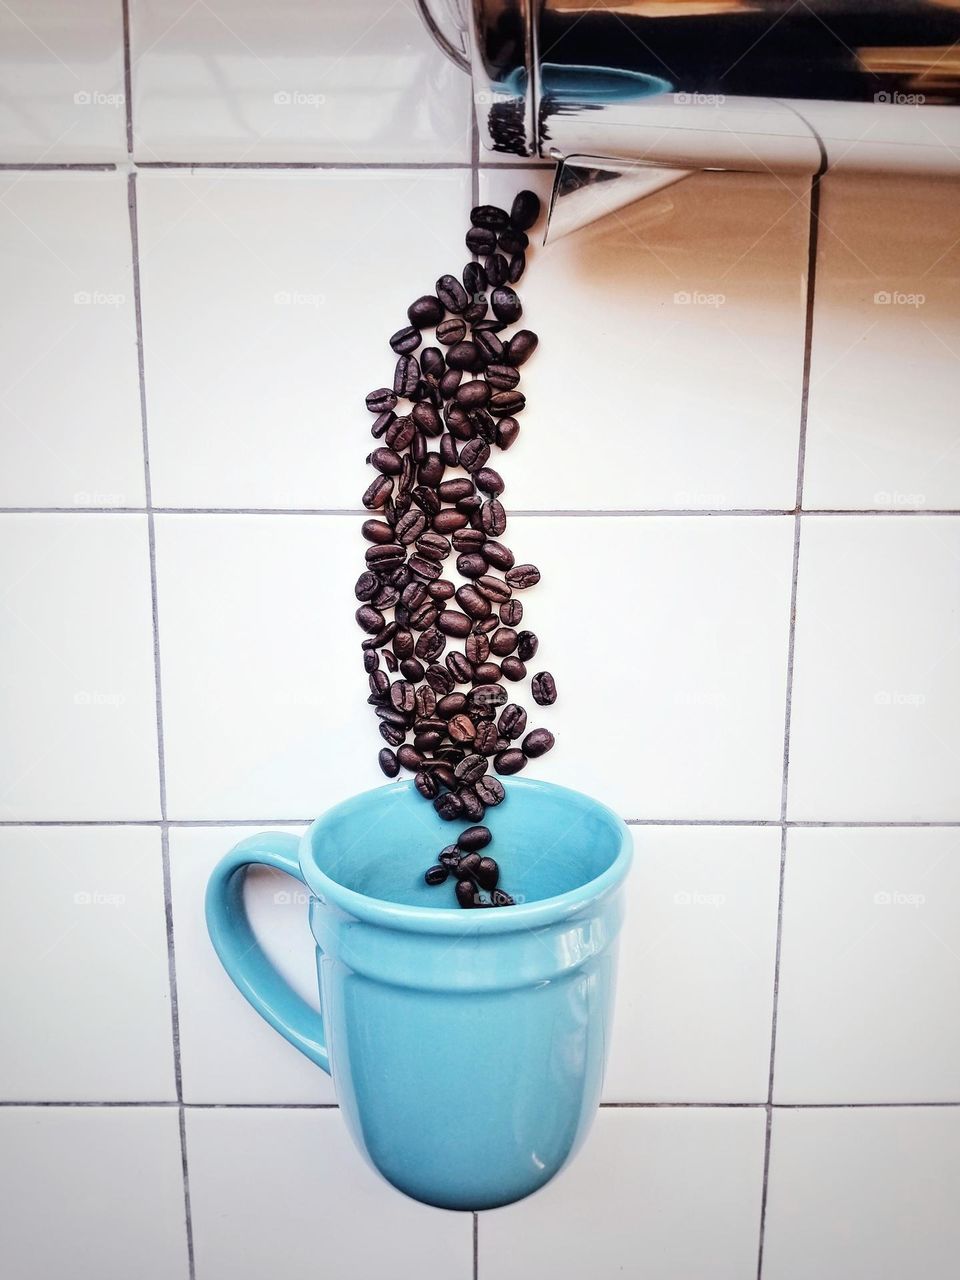 Whole Coffee Beans being poured into a mug from a coffee pot from above